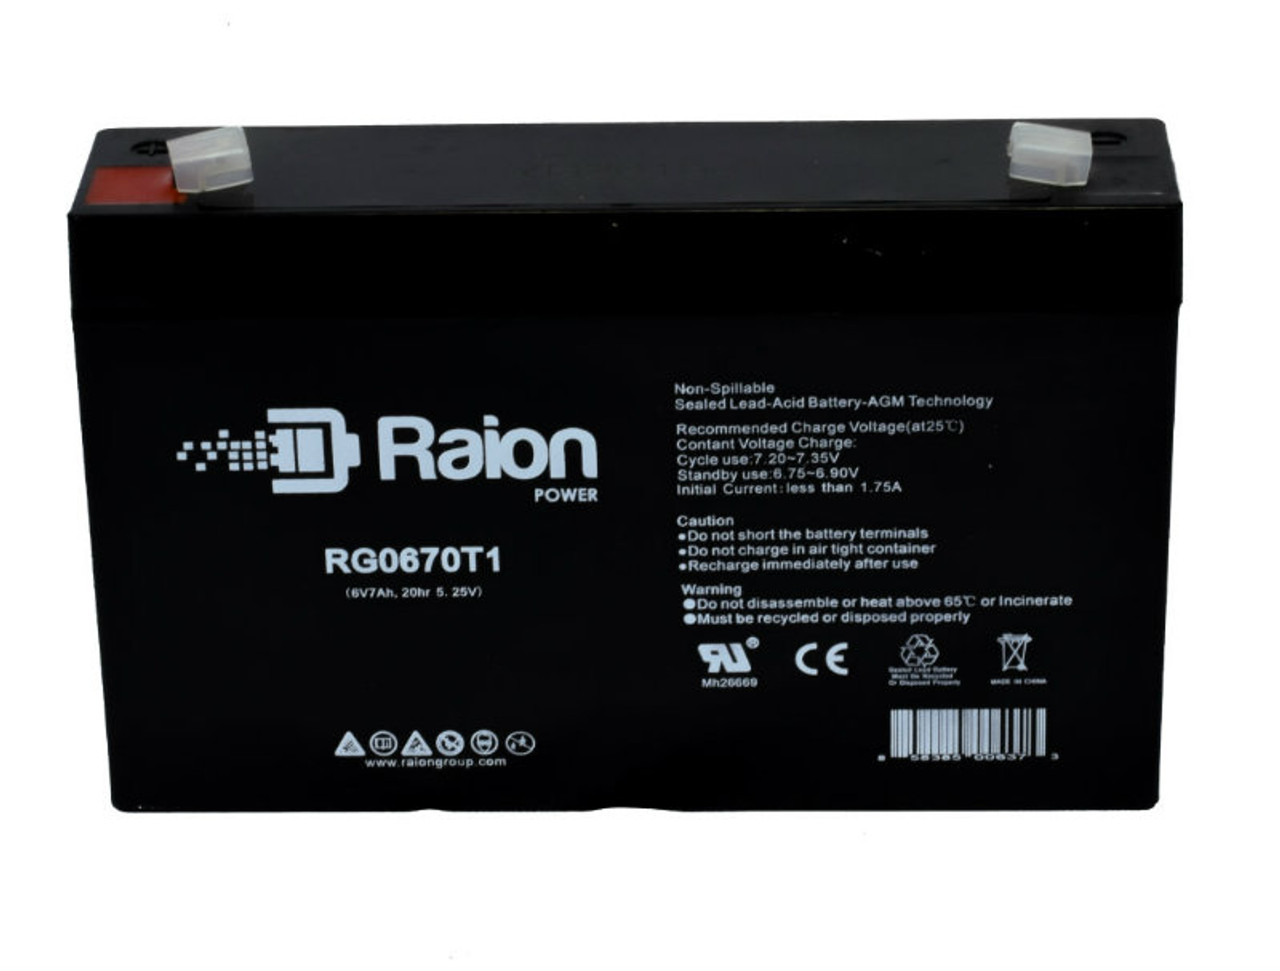 Raion Power RG0670T1 Replacement Battery Cartridge for Light Alarms 1ZV11